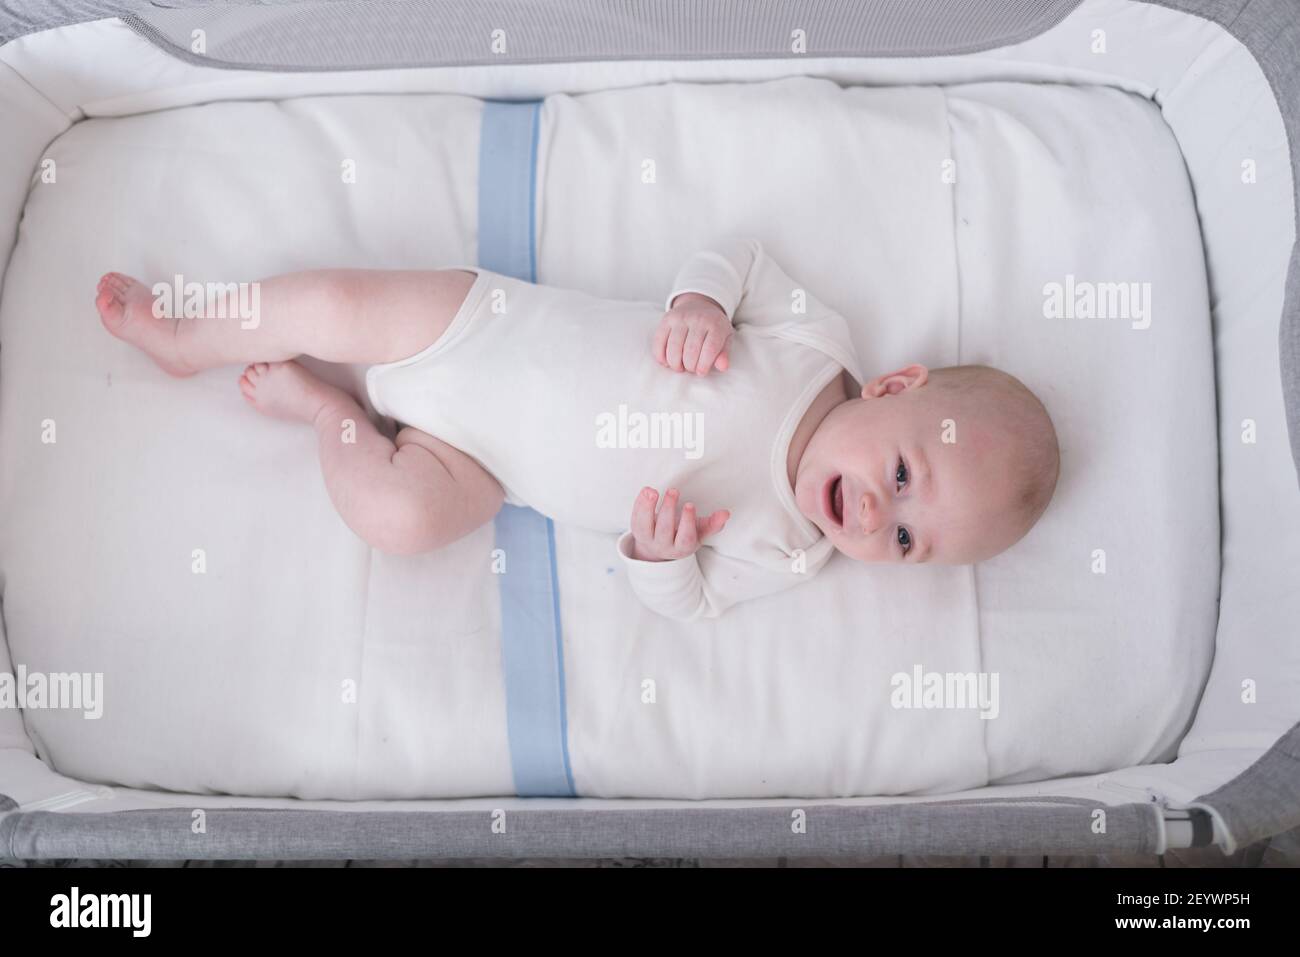 6 month old baby boy lying in his crib looking at the camera and smiling. baby products concept. Stock Photo